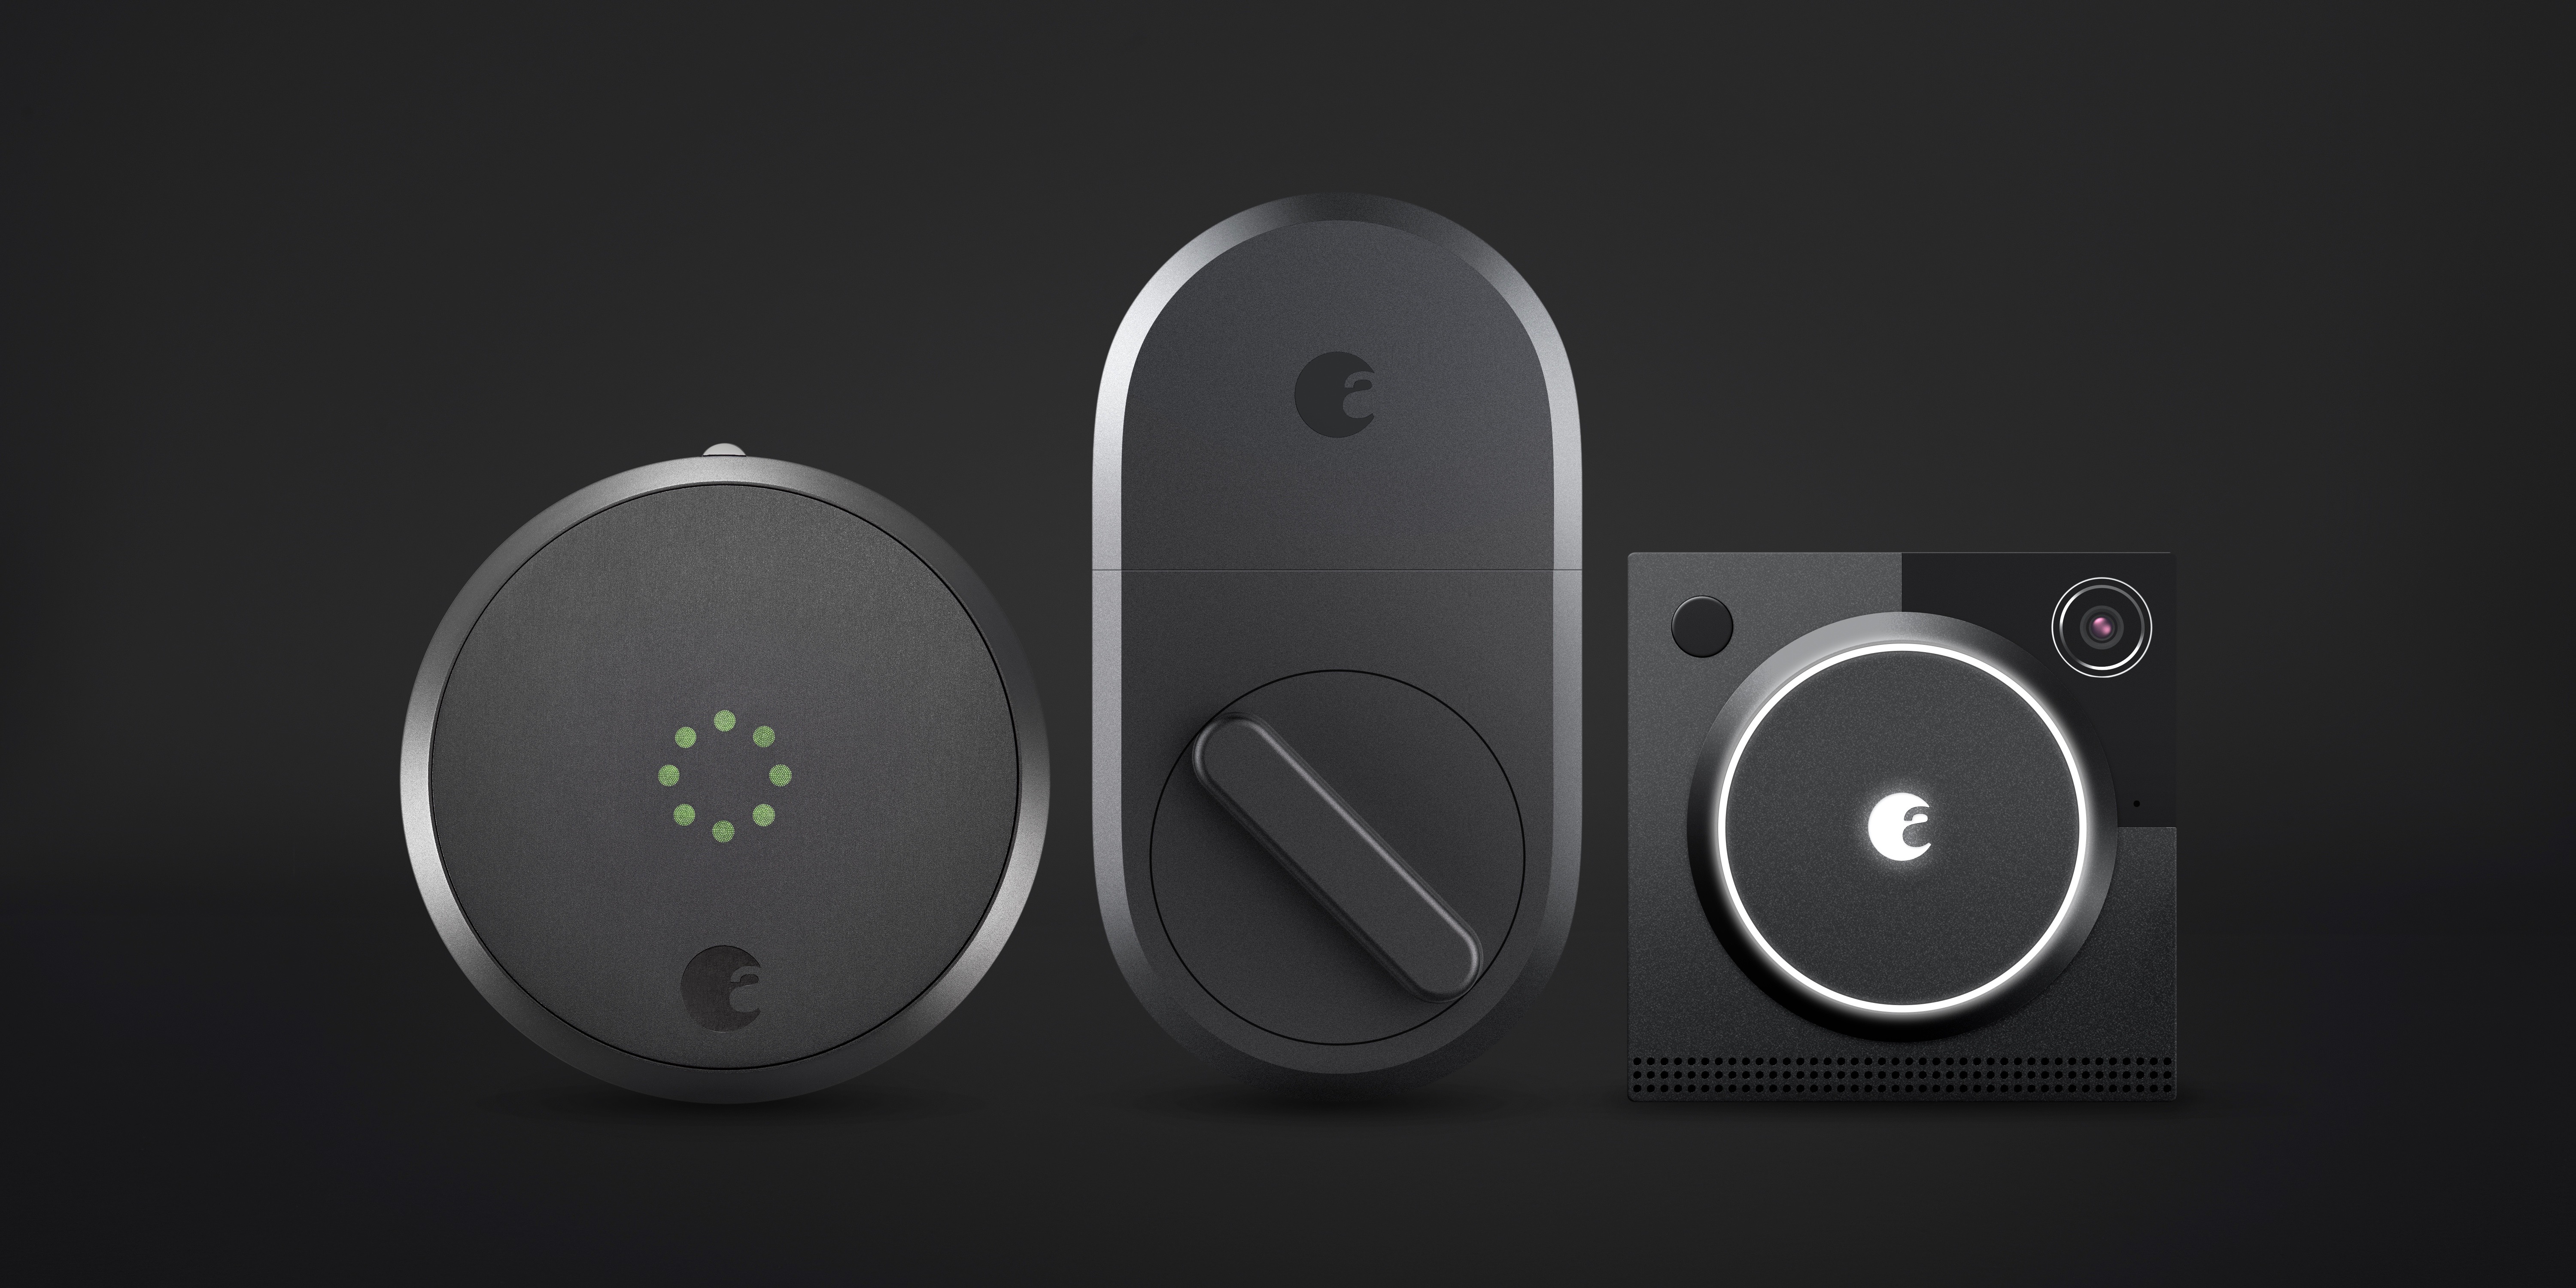 Review: August Smart Lock Pro works 